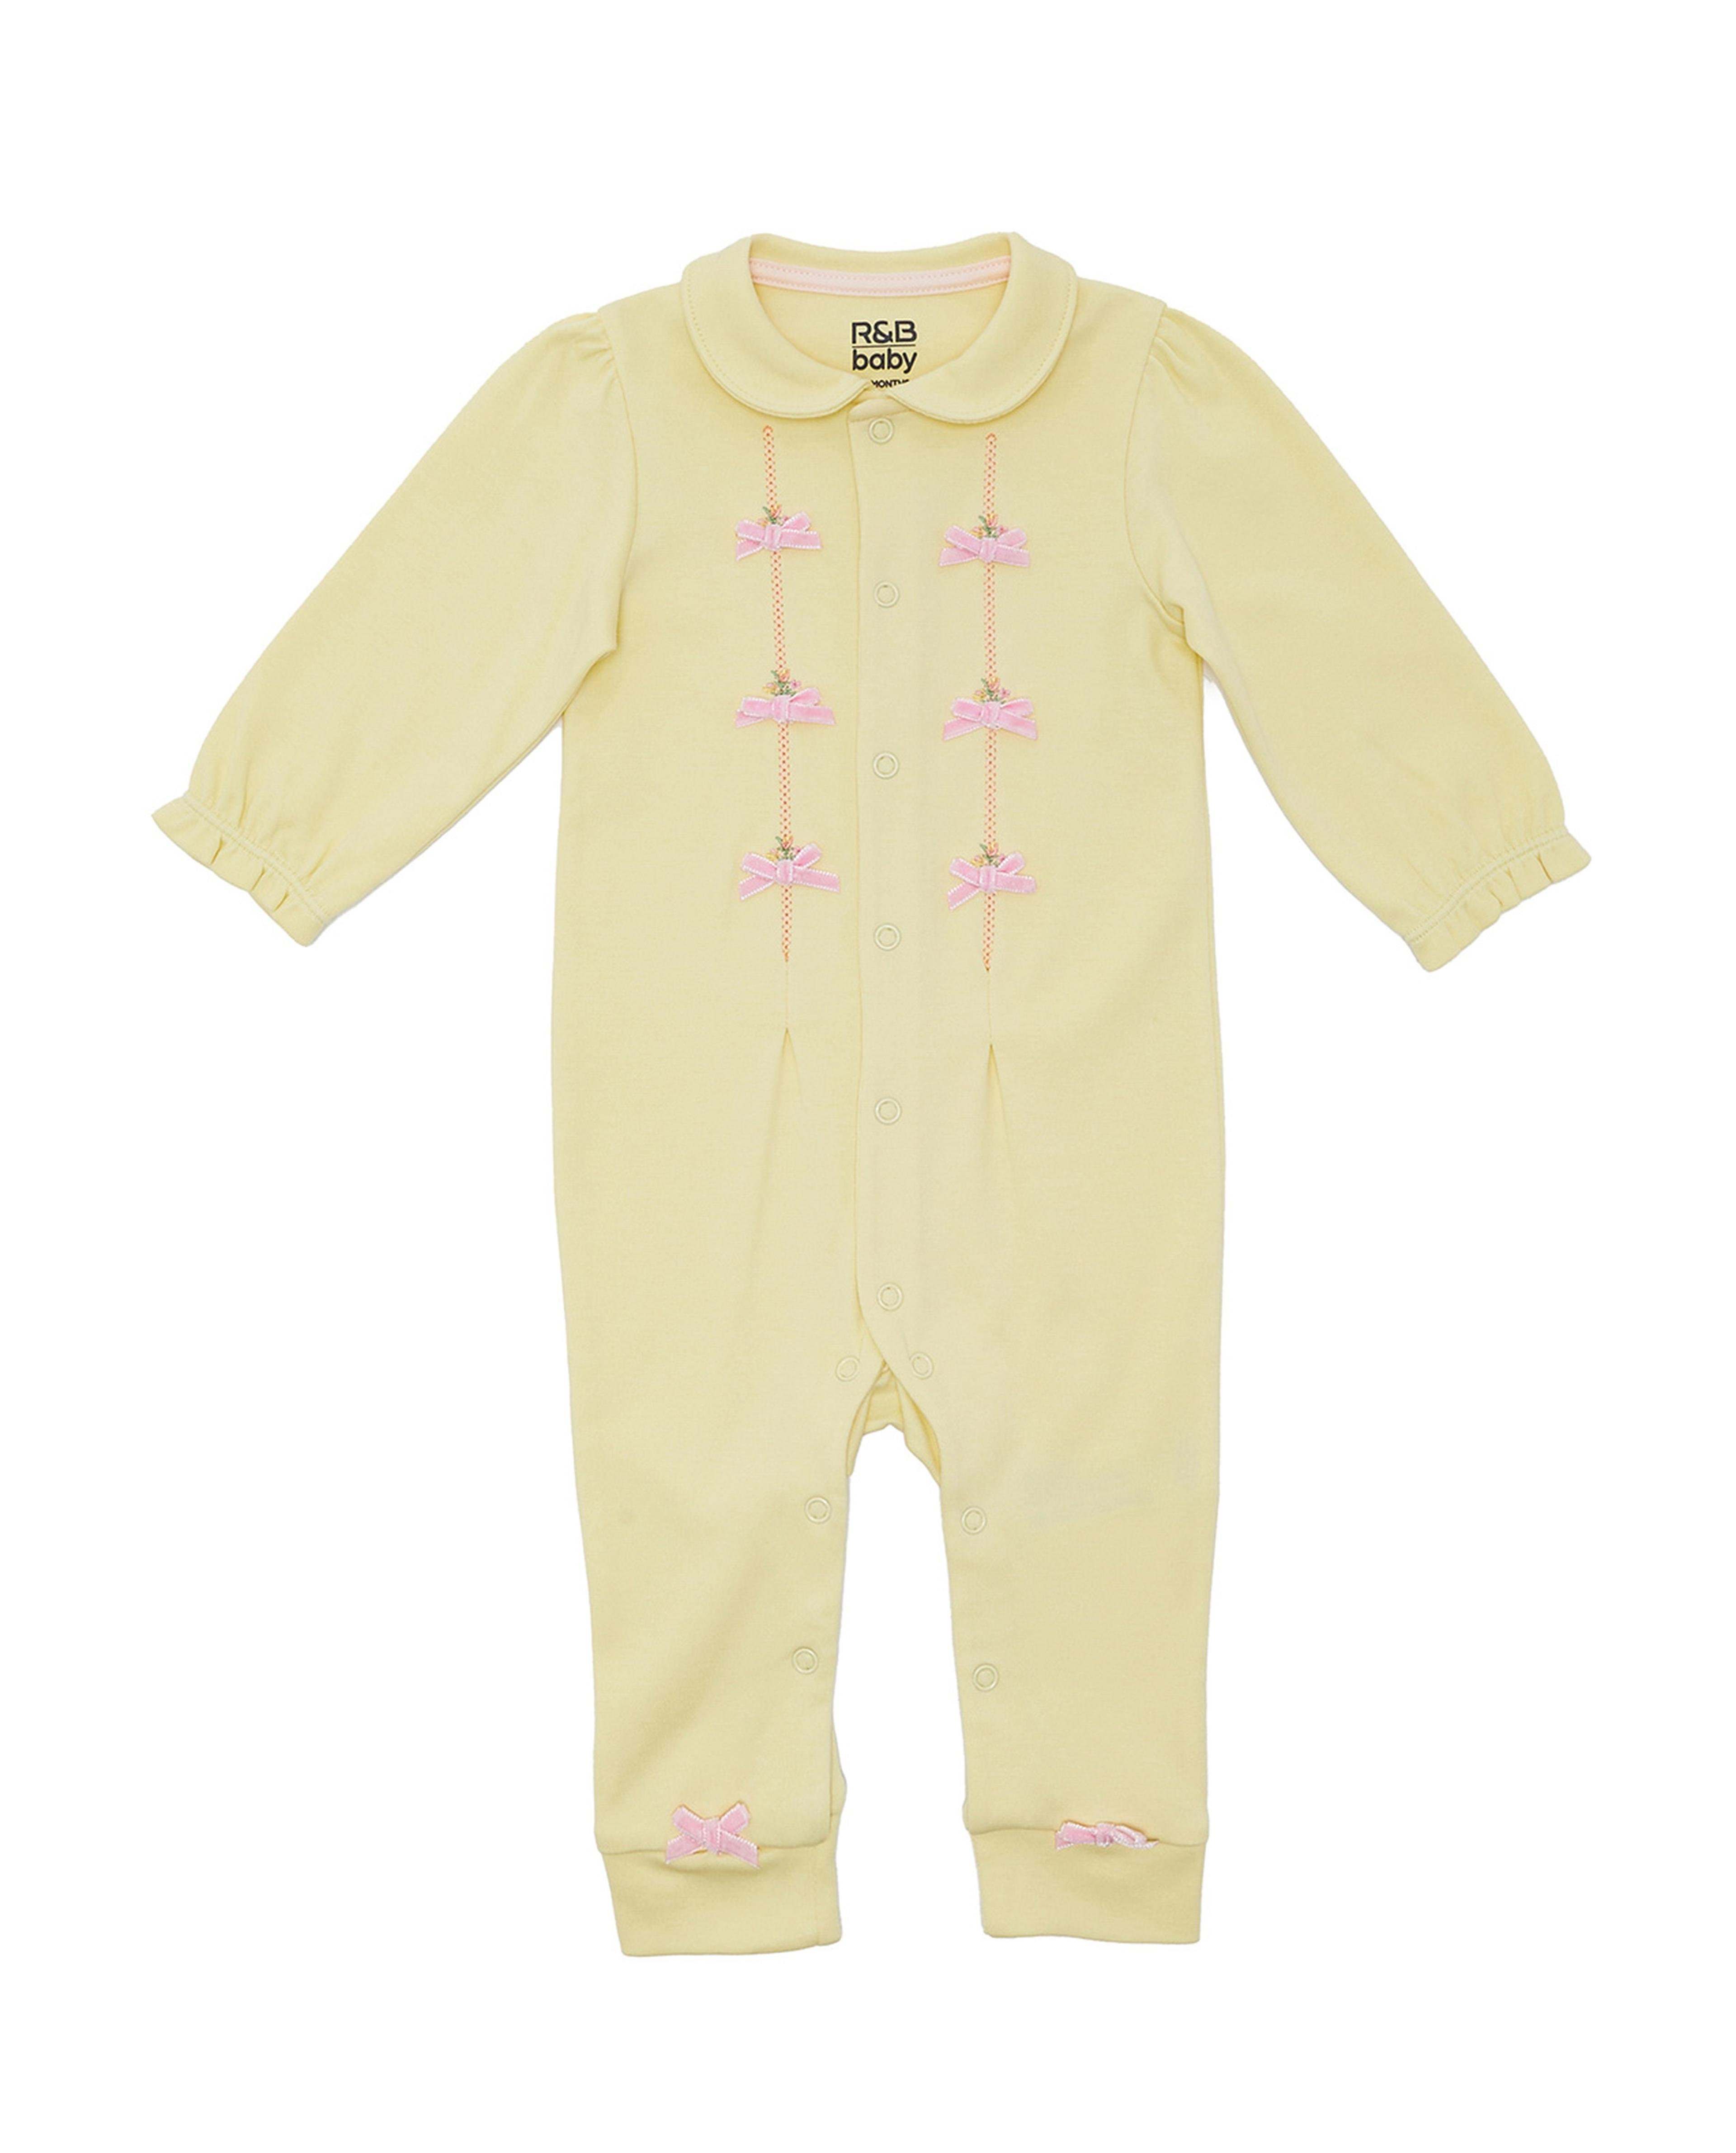 Bow Detail Sleepsuit with Crew Neck and Short Sleeves